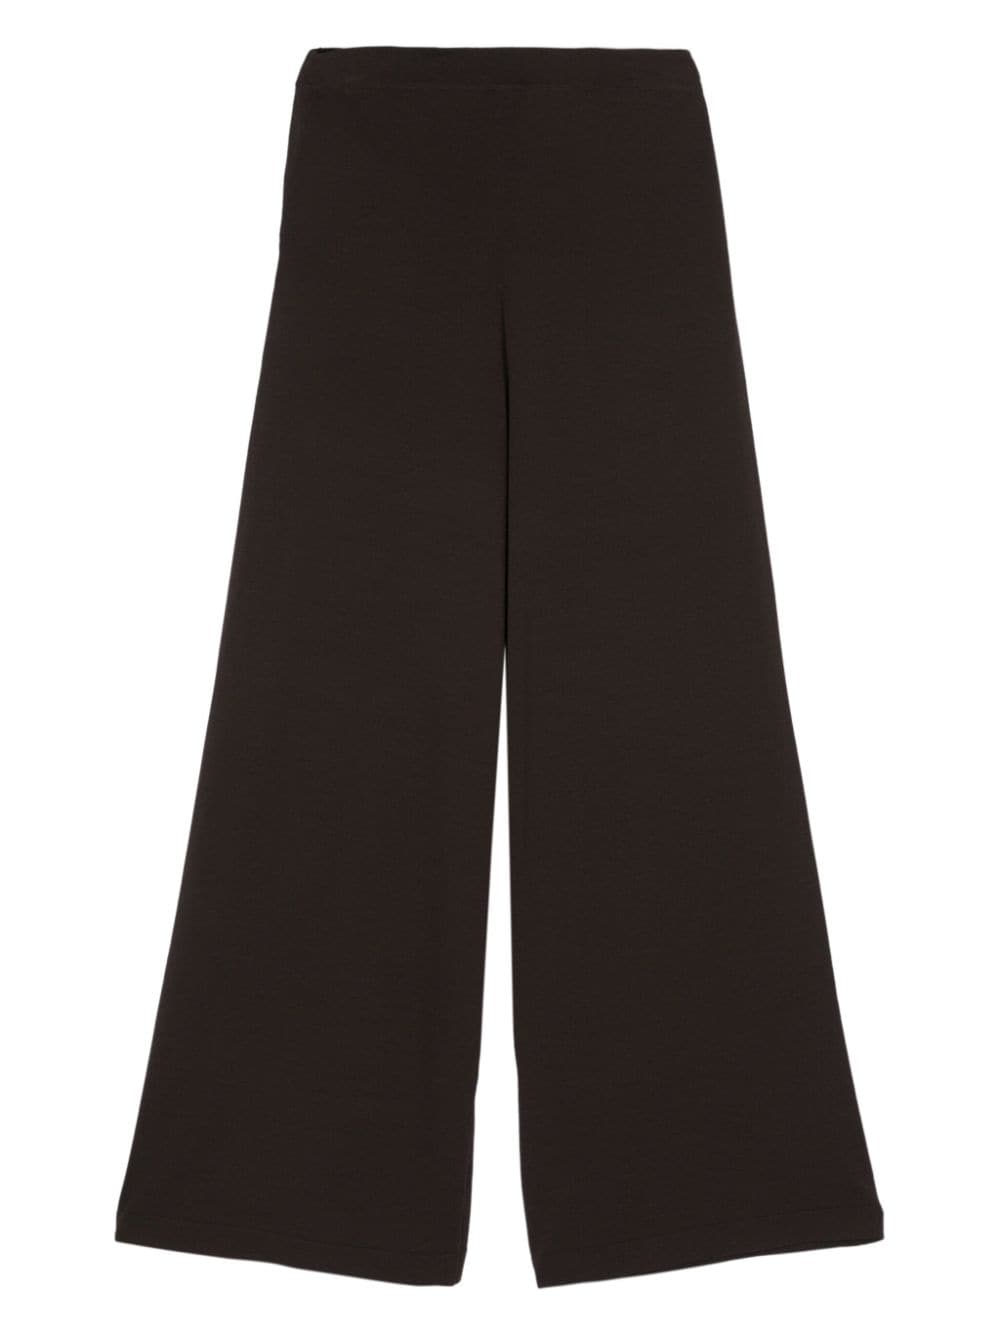 P.A.R.O.S.H. Roux24 knitted palazzo pants - Bruin